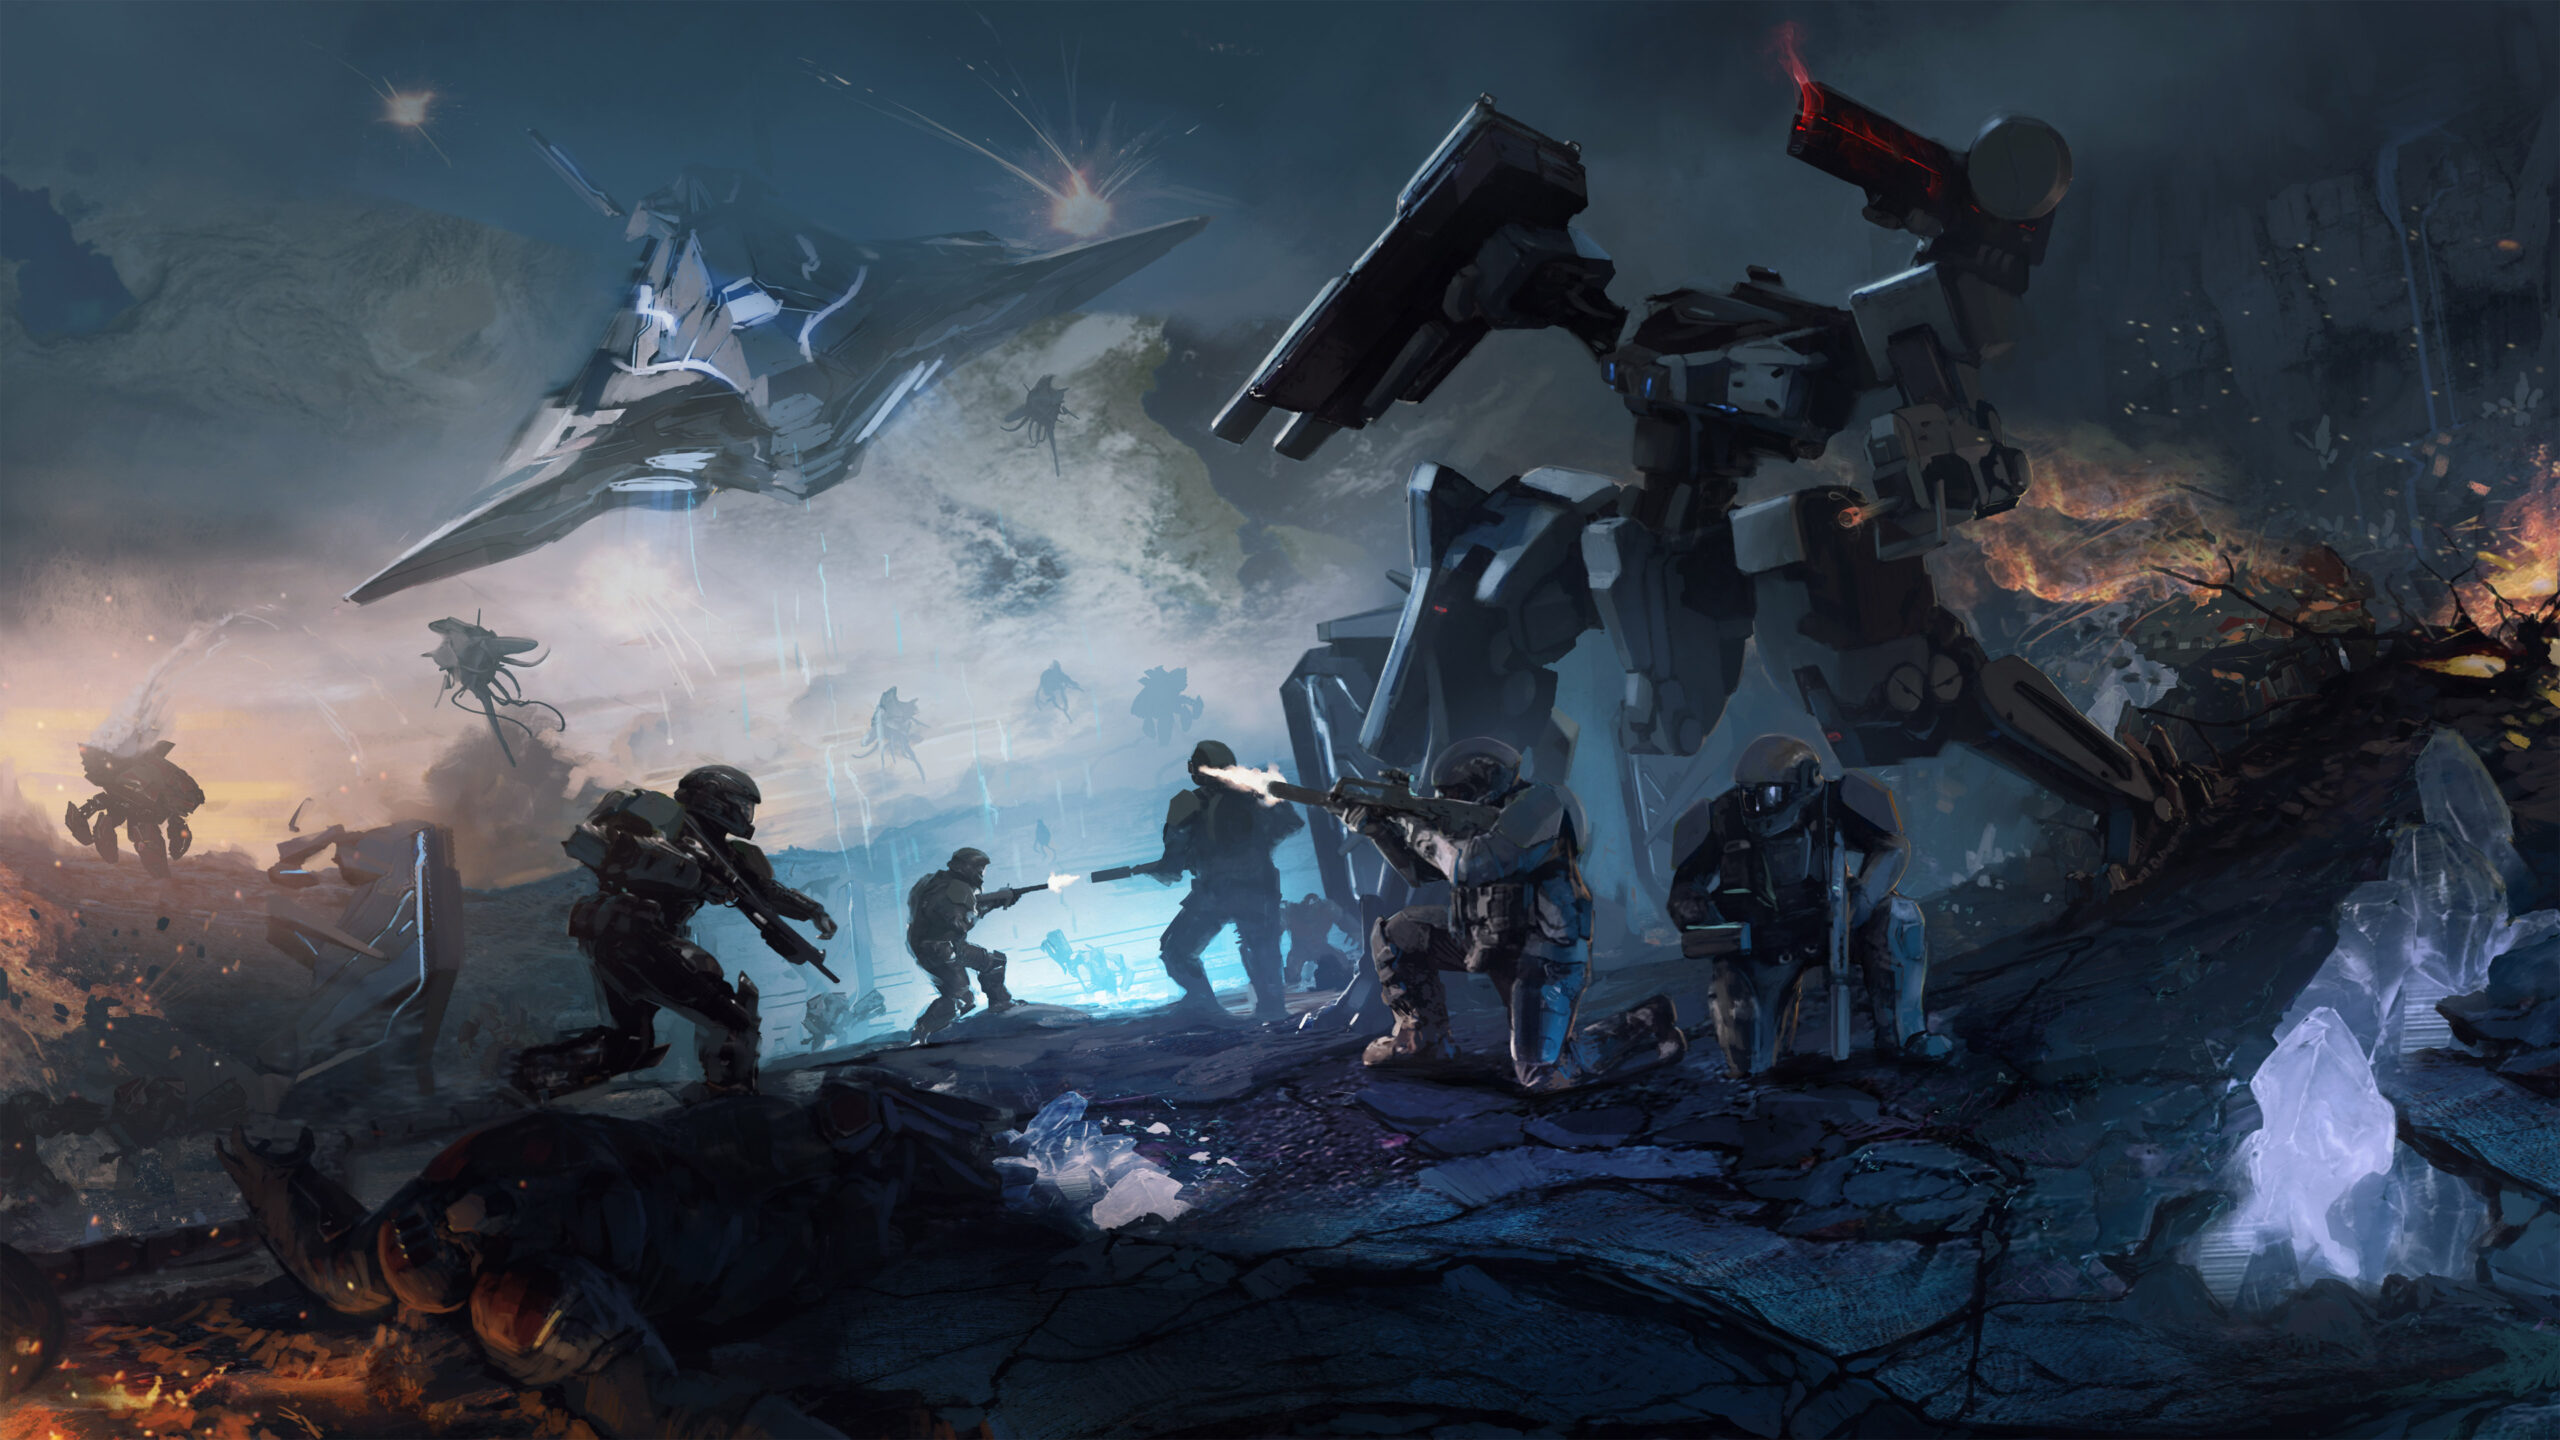 Halo Wars 2 PS Game Fast Setup Download Now